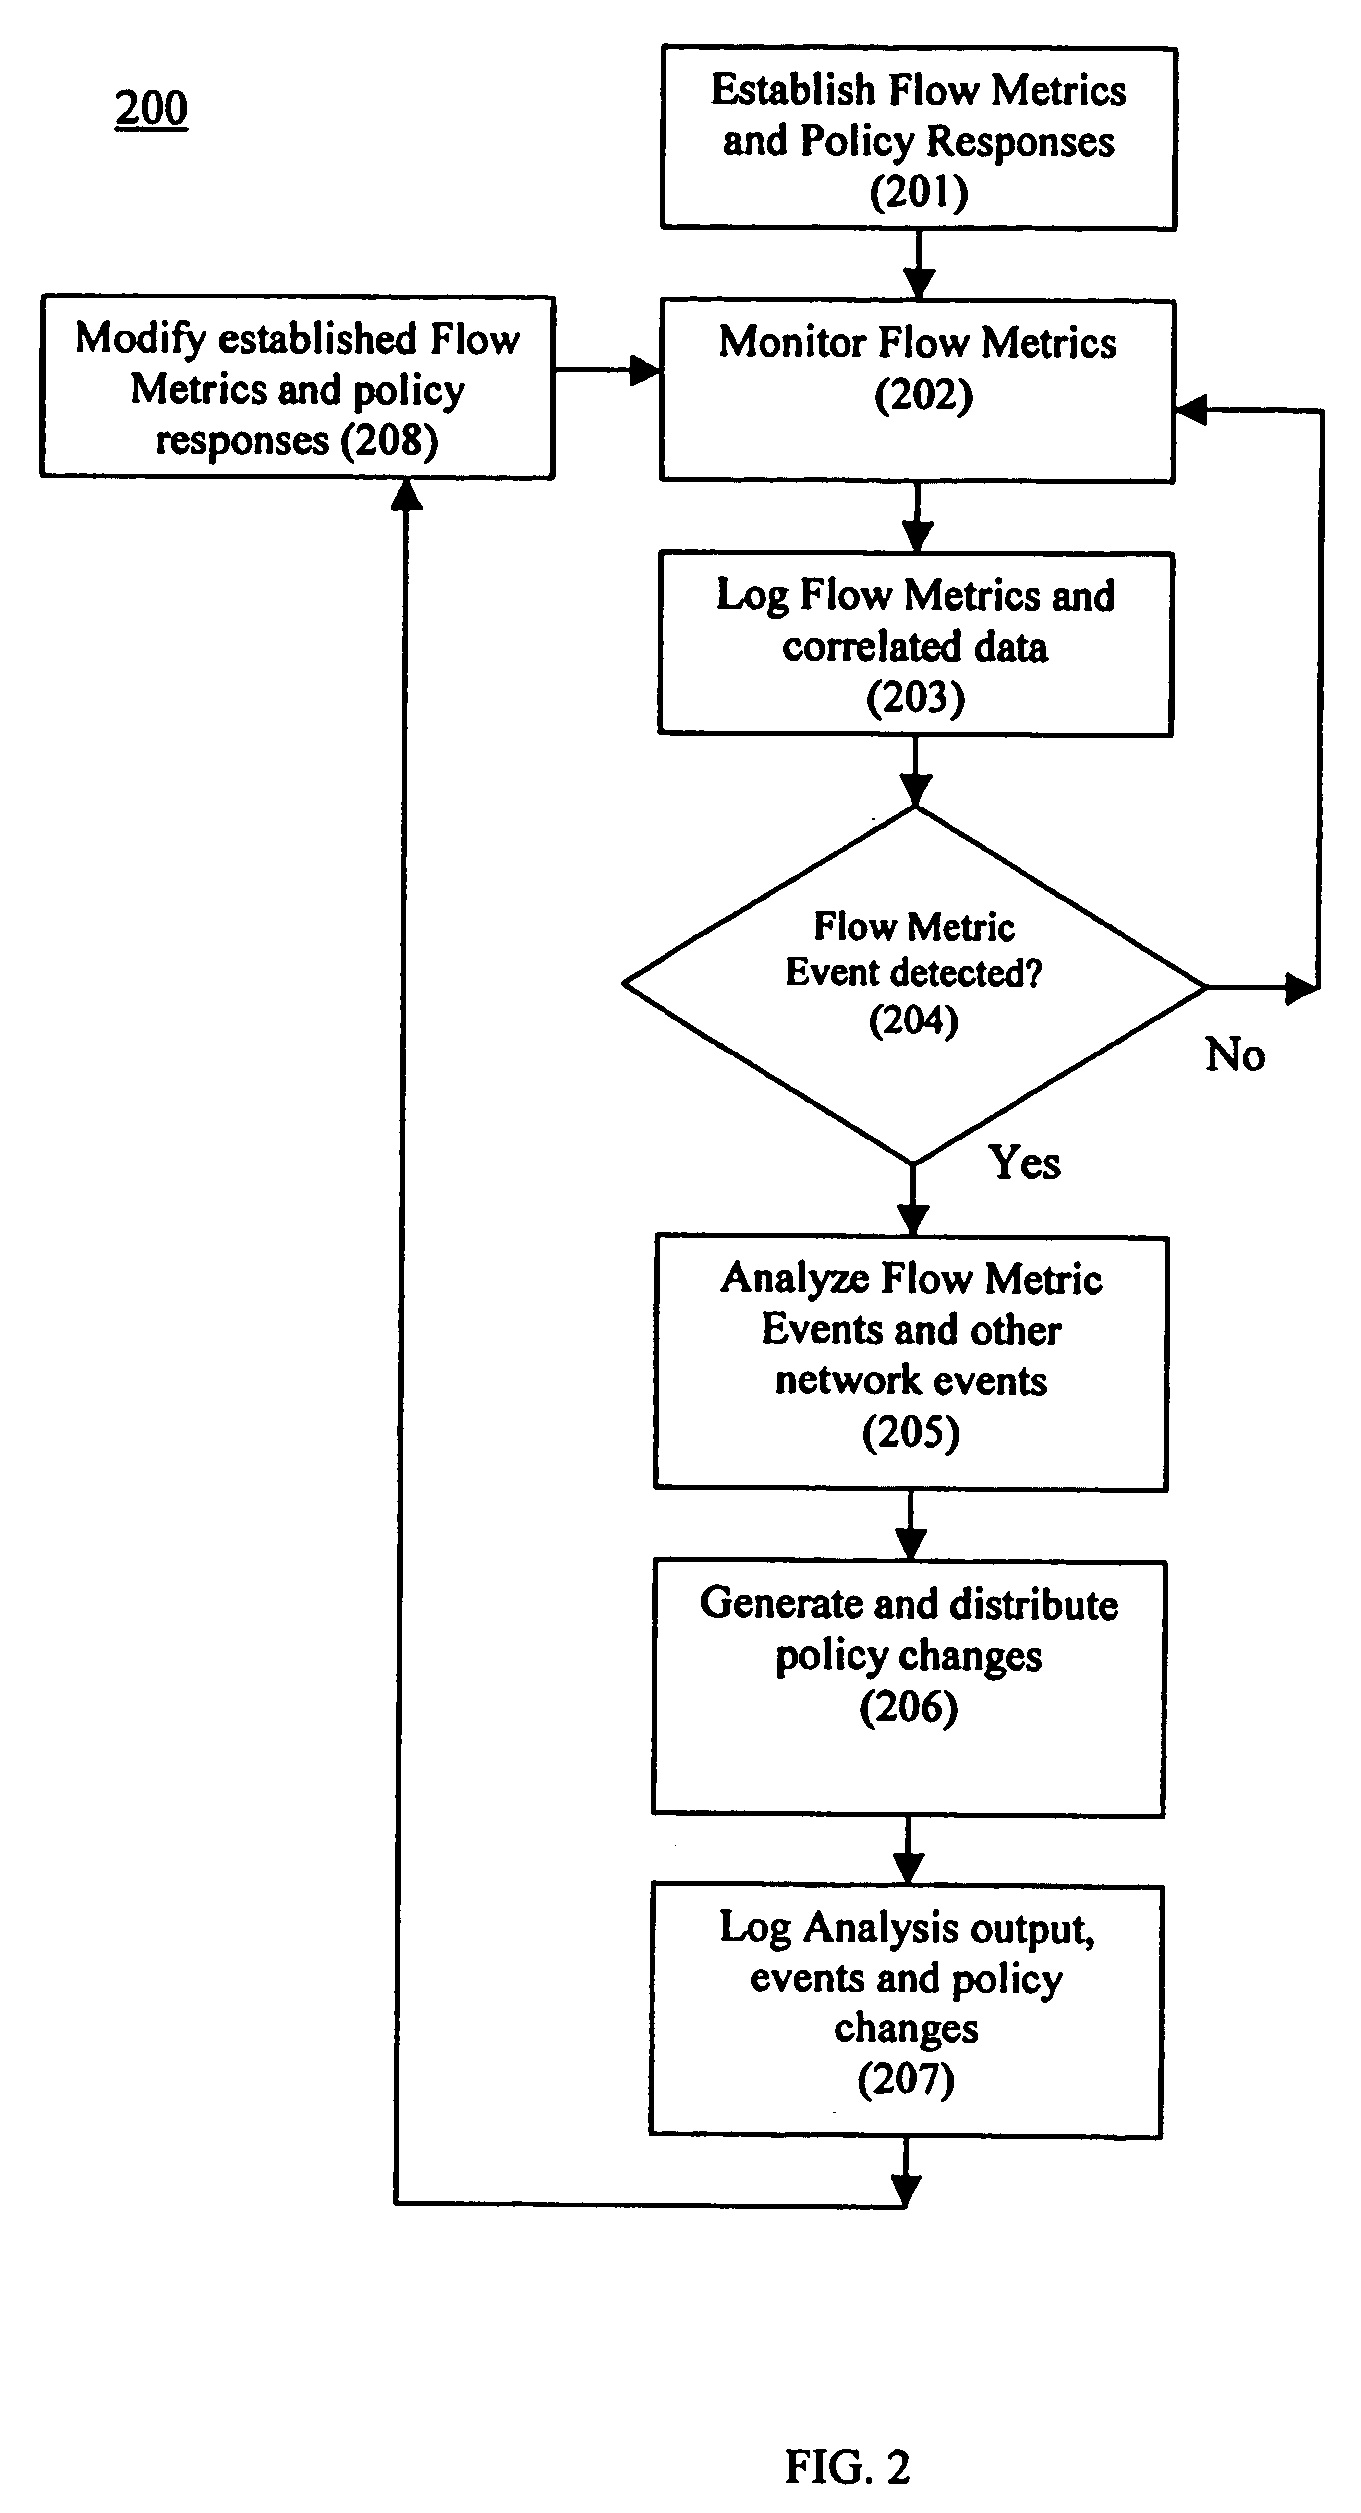 Using flow metric events to control network operation